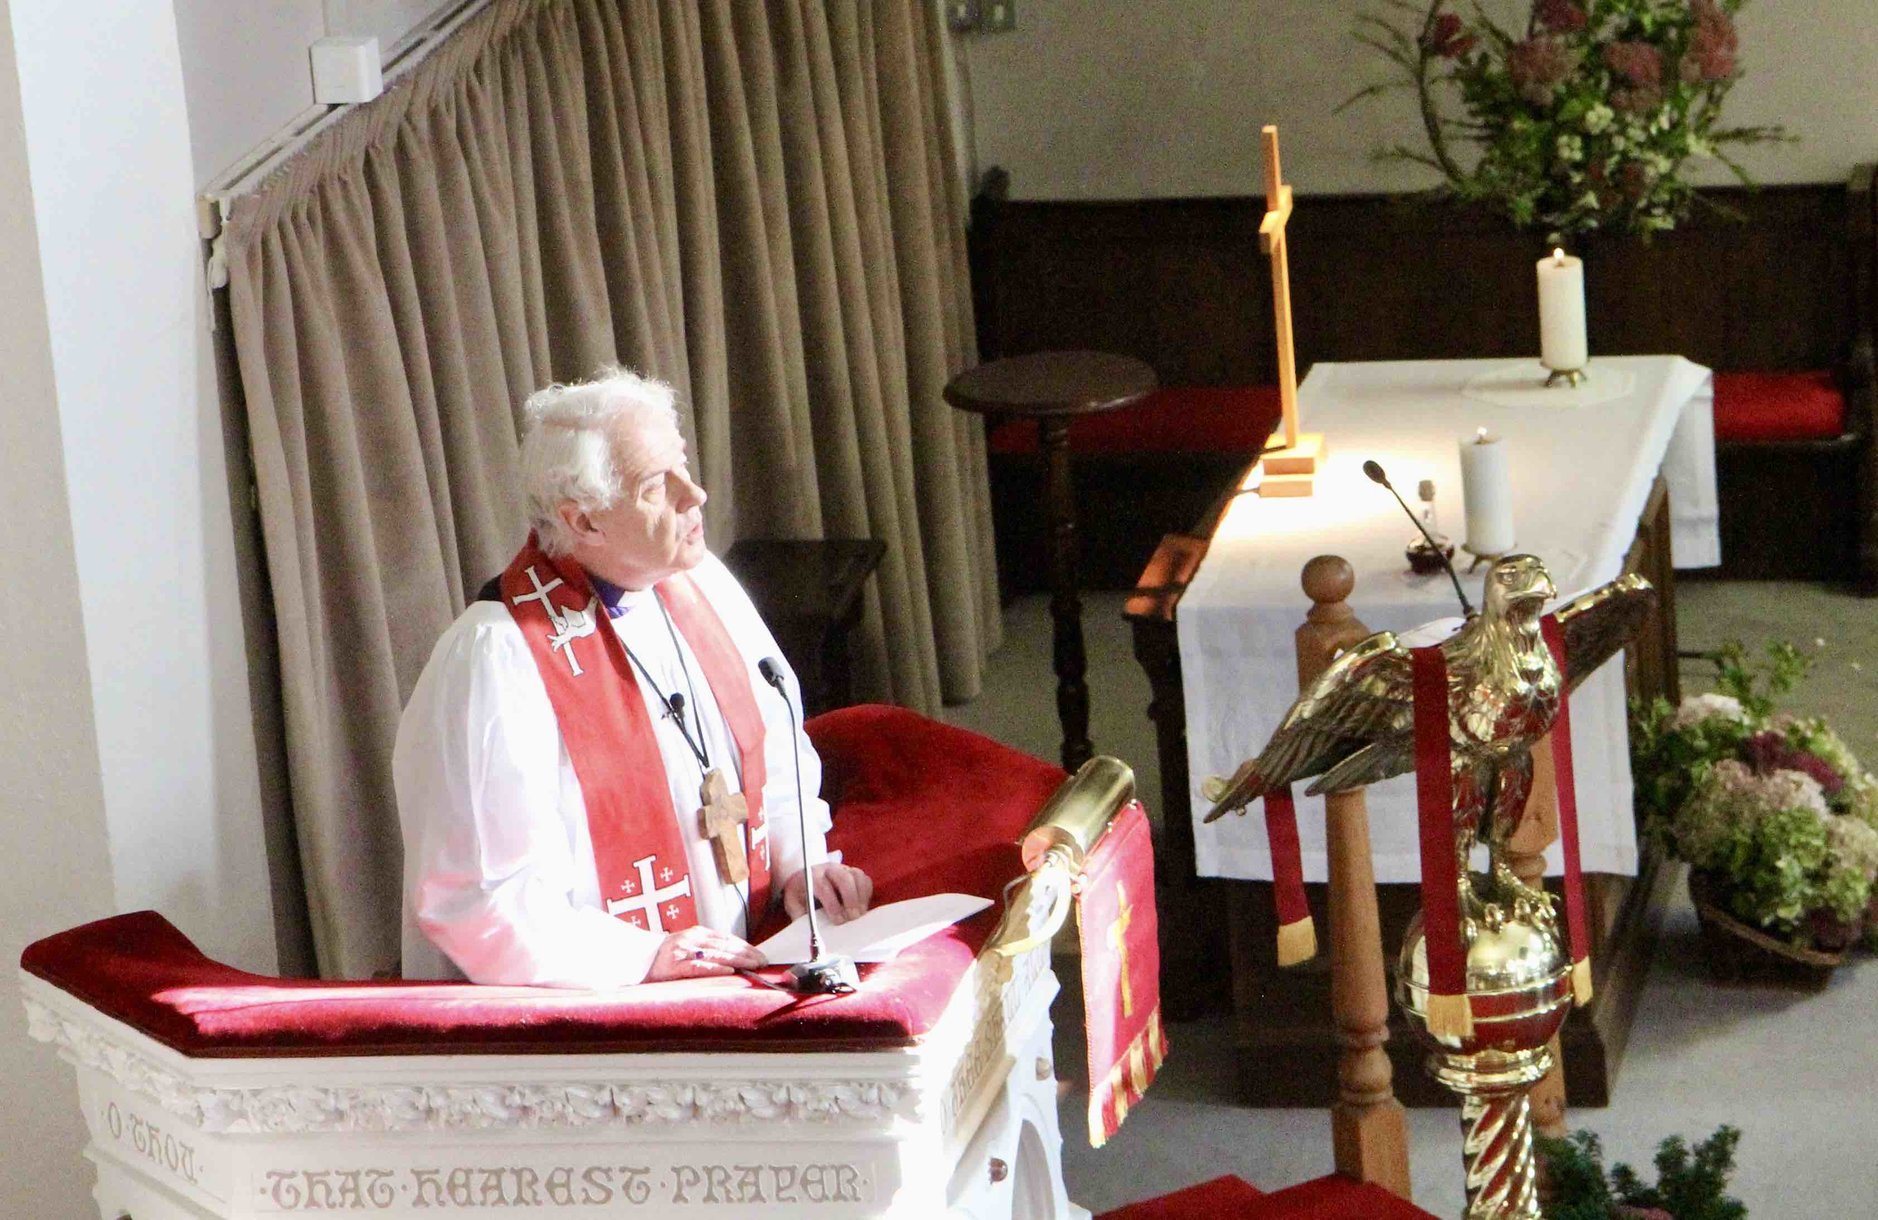 Archbishop Michael Jackson delivering his Presidential Address during the Synod Service in Christ Church Taney.